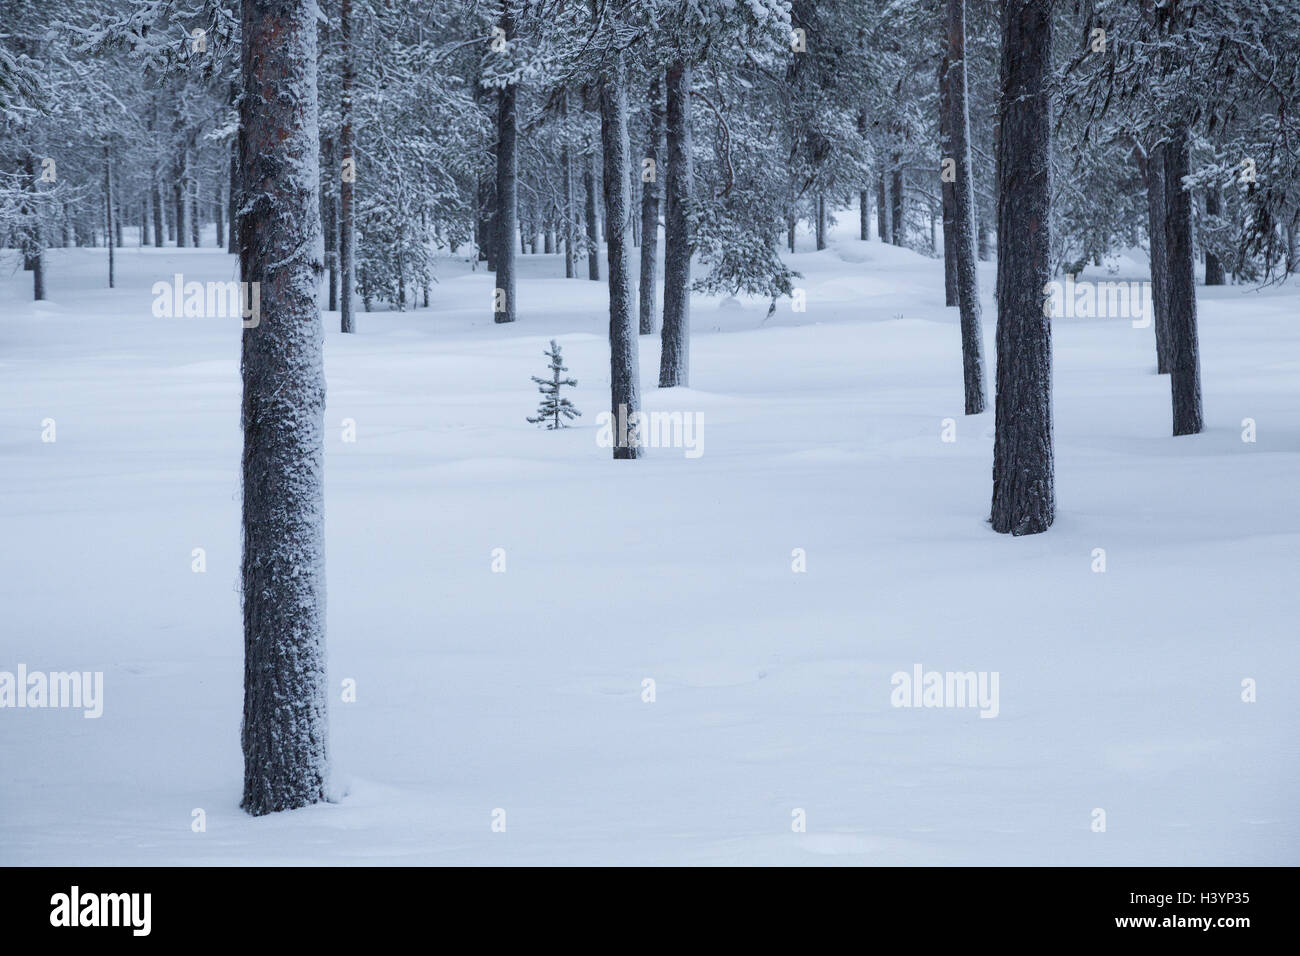 Taiga forest in snow, Finland Stock Photo